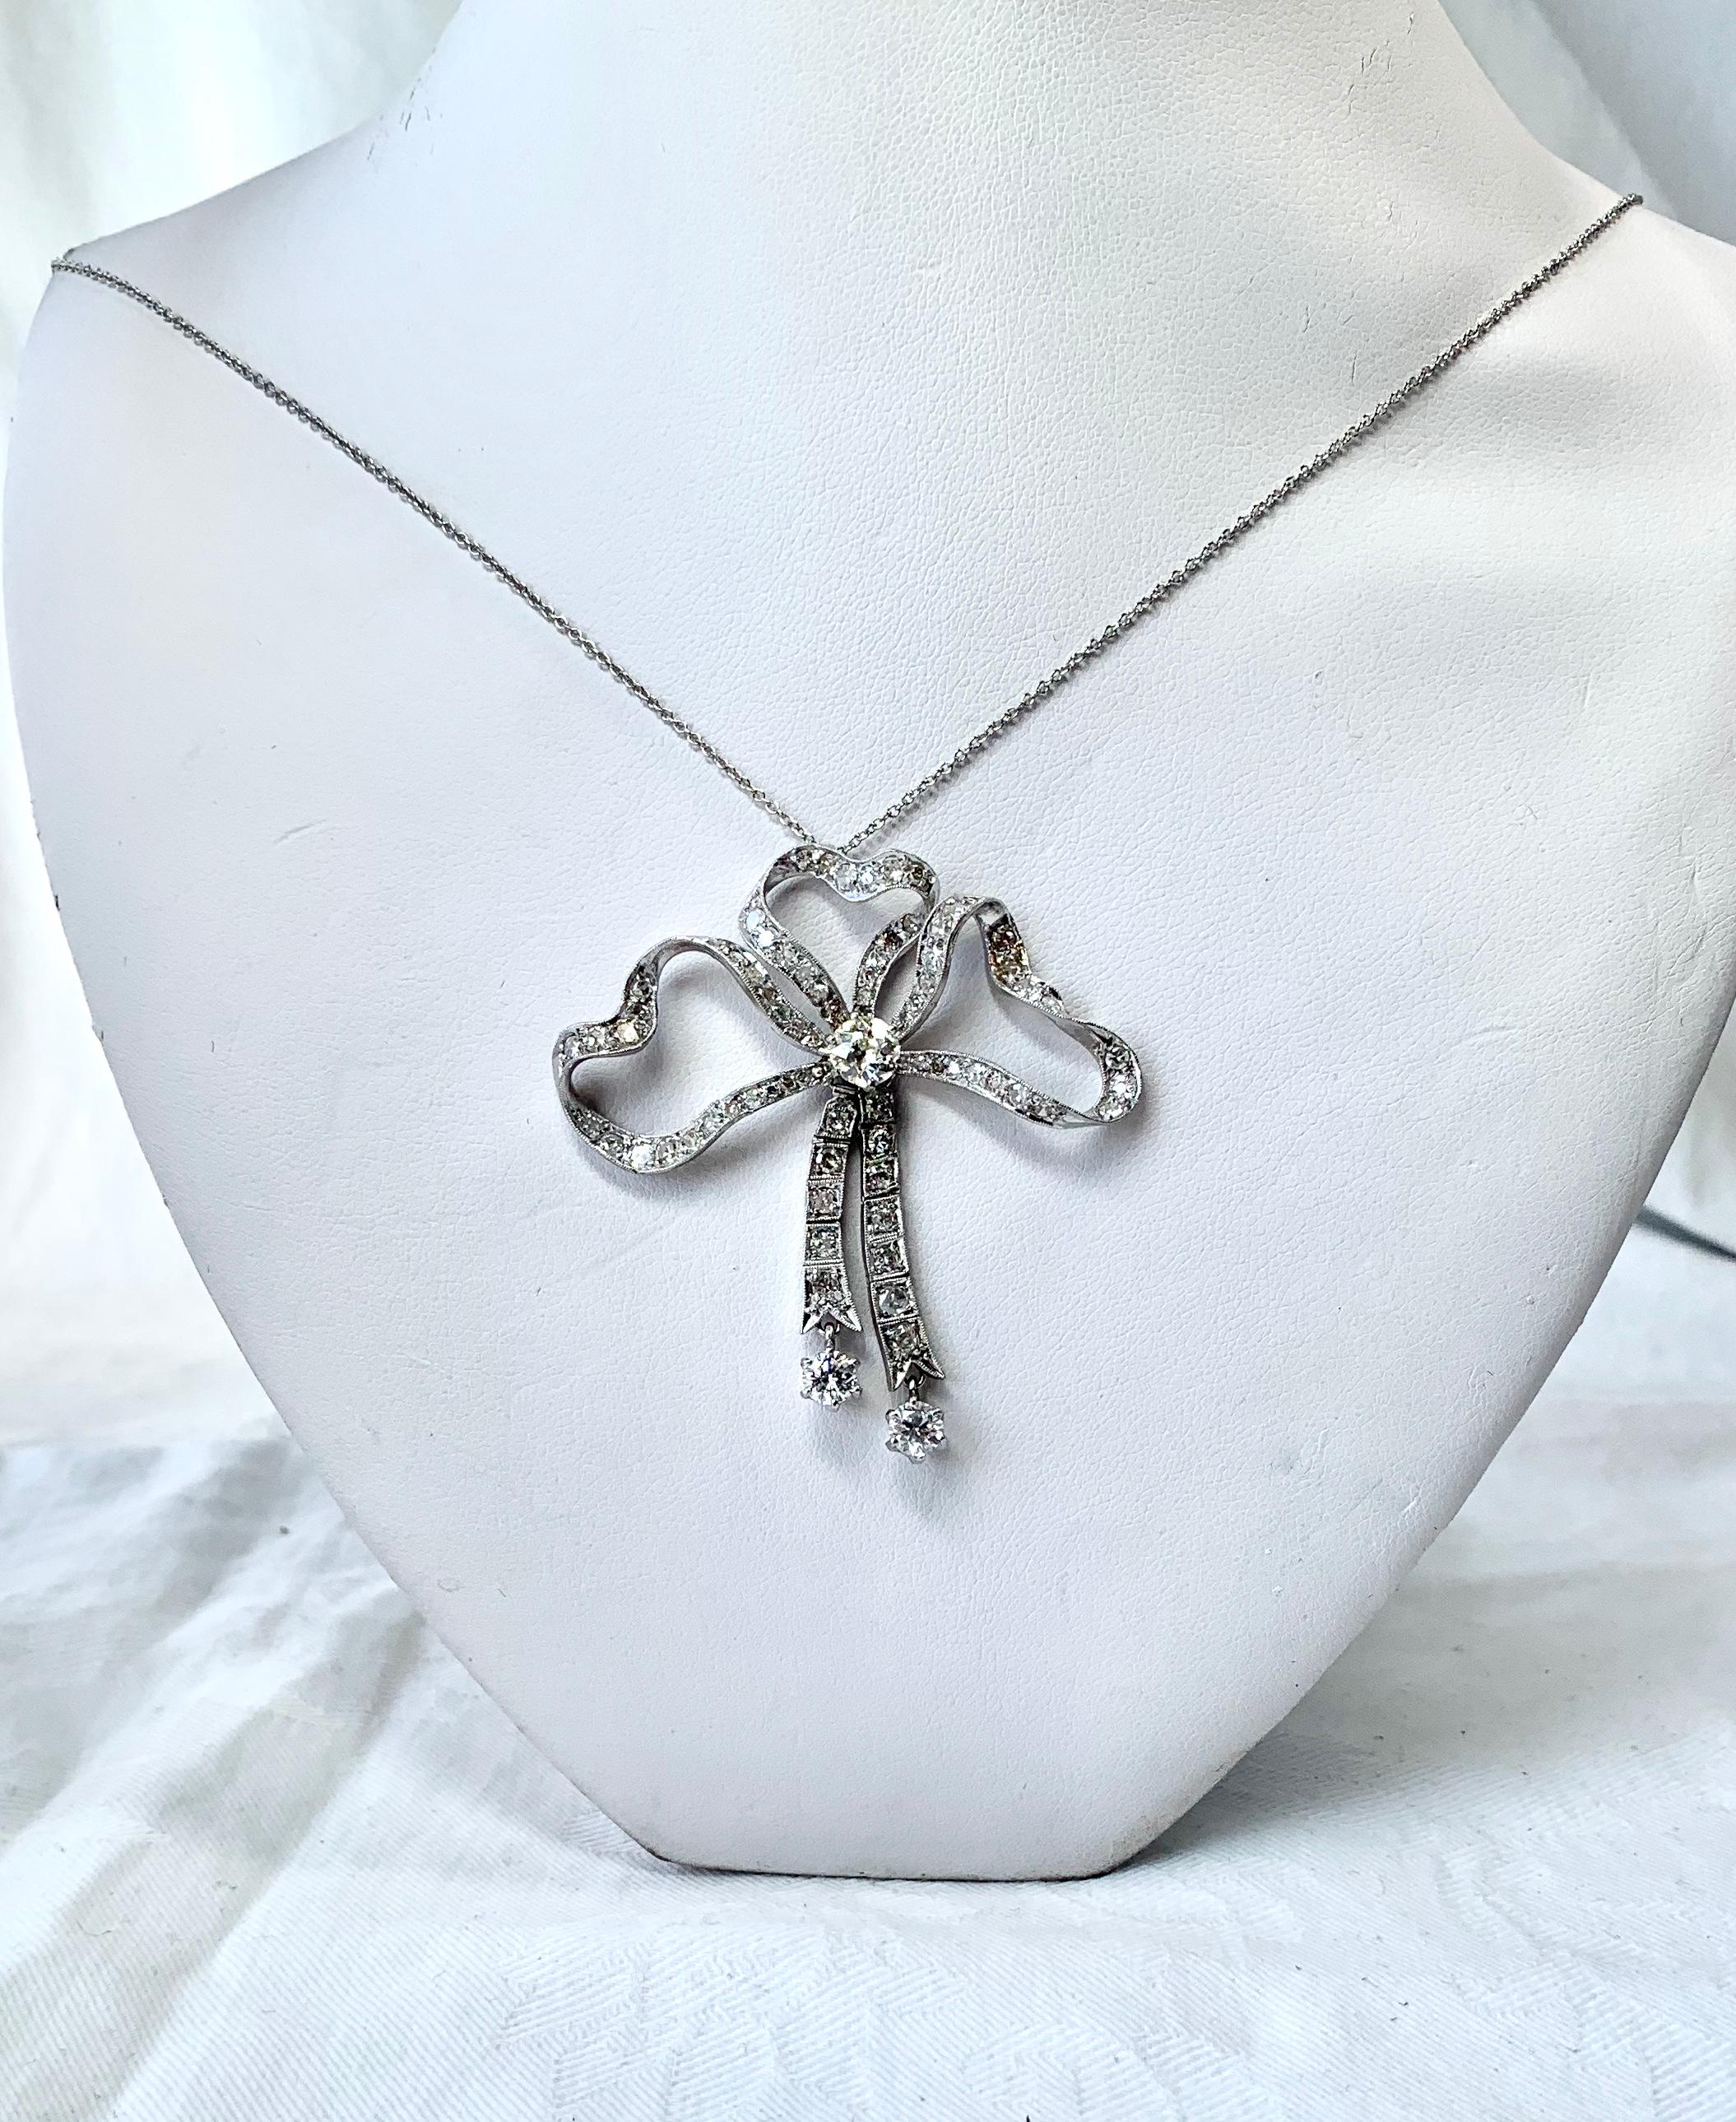 A stunning antique Victorian - Edwardian Platinum 3.85 Carat Diamond Pendant Necklace.  The gorgeous necklace is in a ribbon bow motif with articulated ribbons below.  The bow is set with 3.85 Carats of Diamonds in Platinum.  The central diamond is